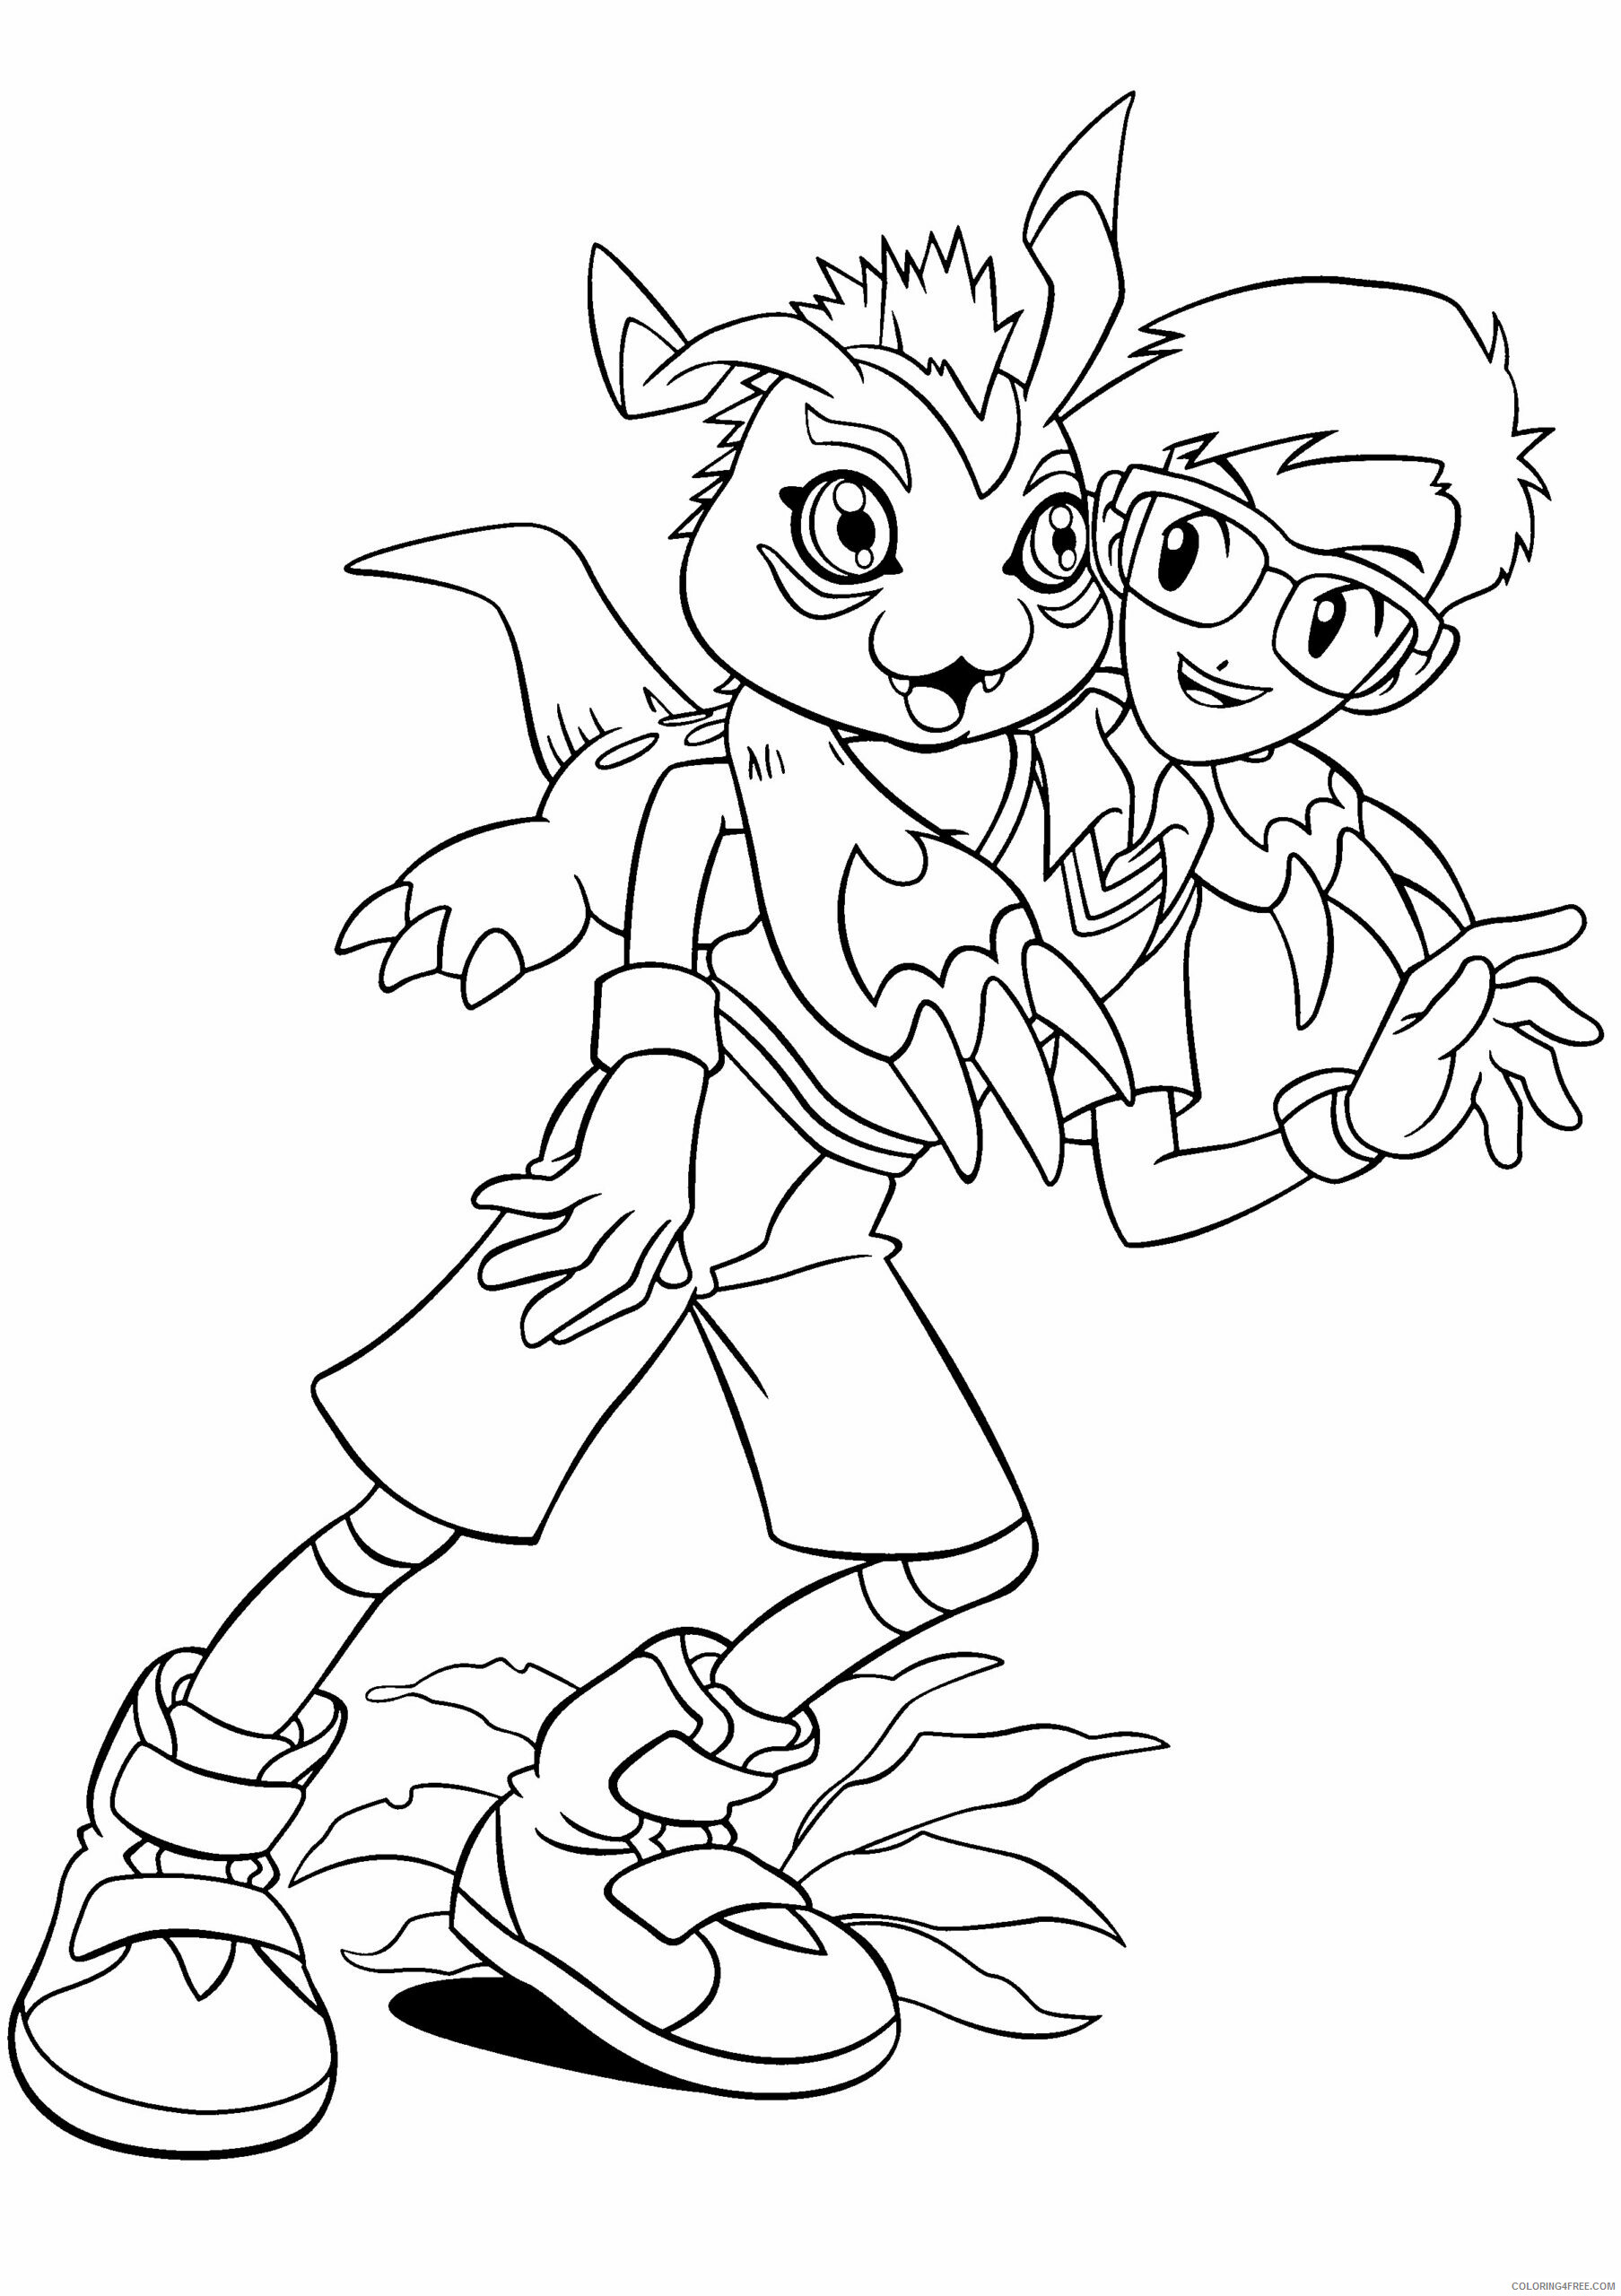 Digimon Printable Coloring Pages Anime digimon 102 2021 0209 Coloring4free